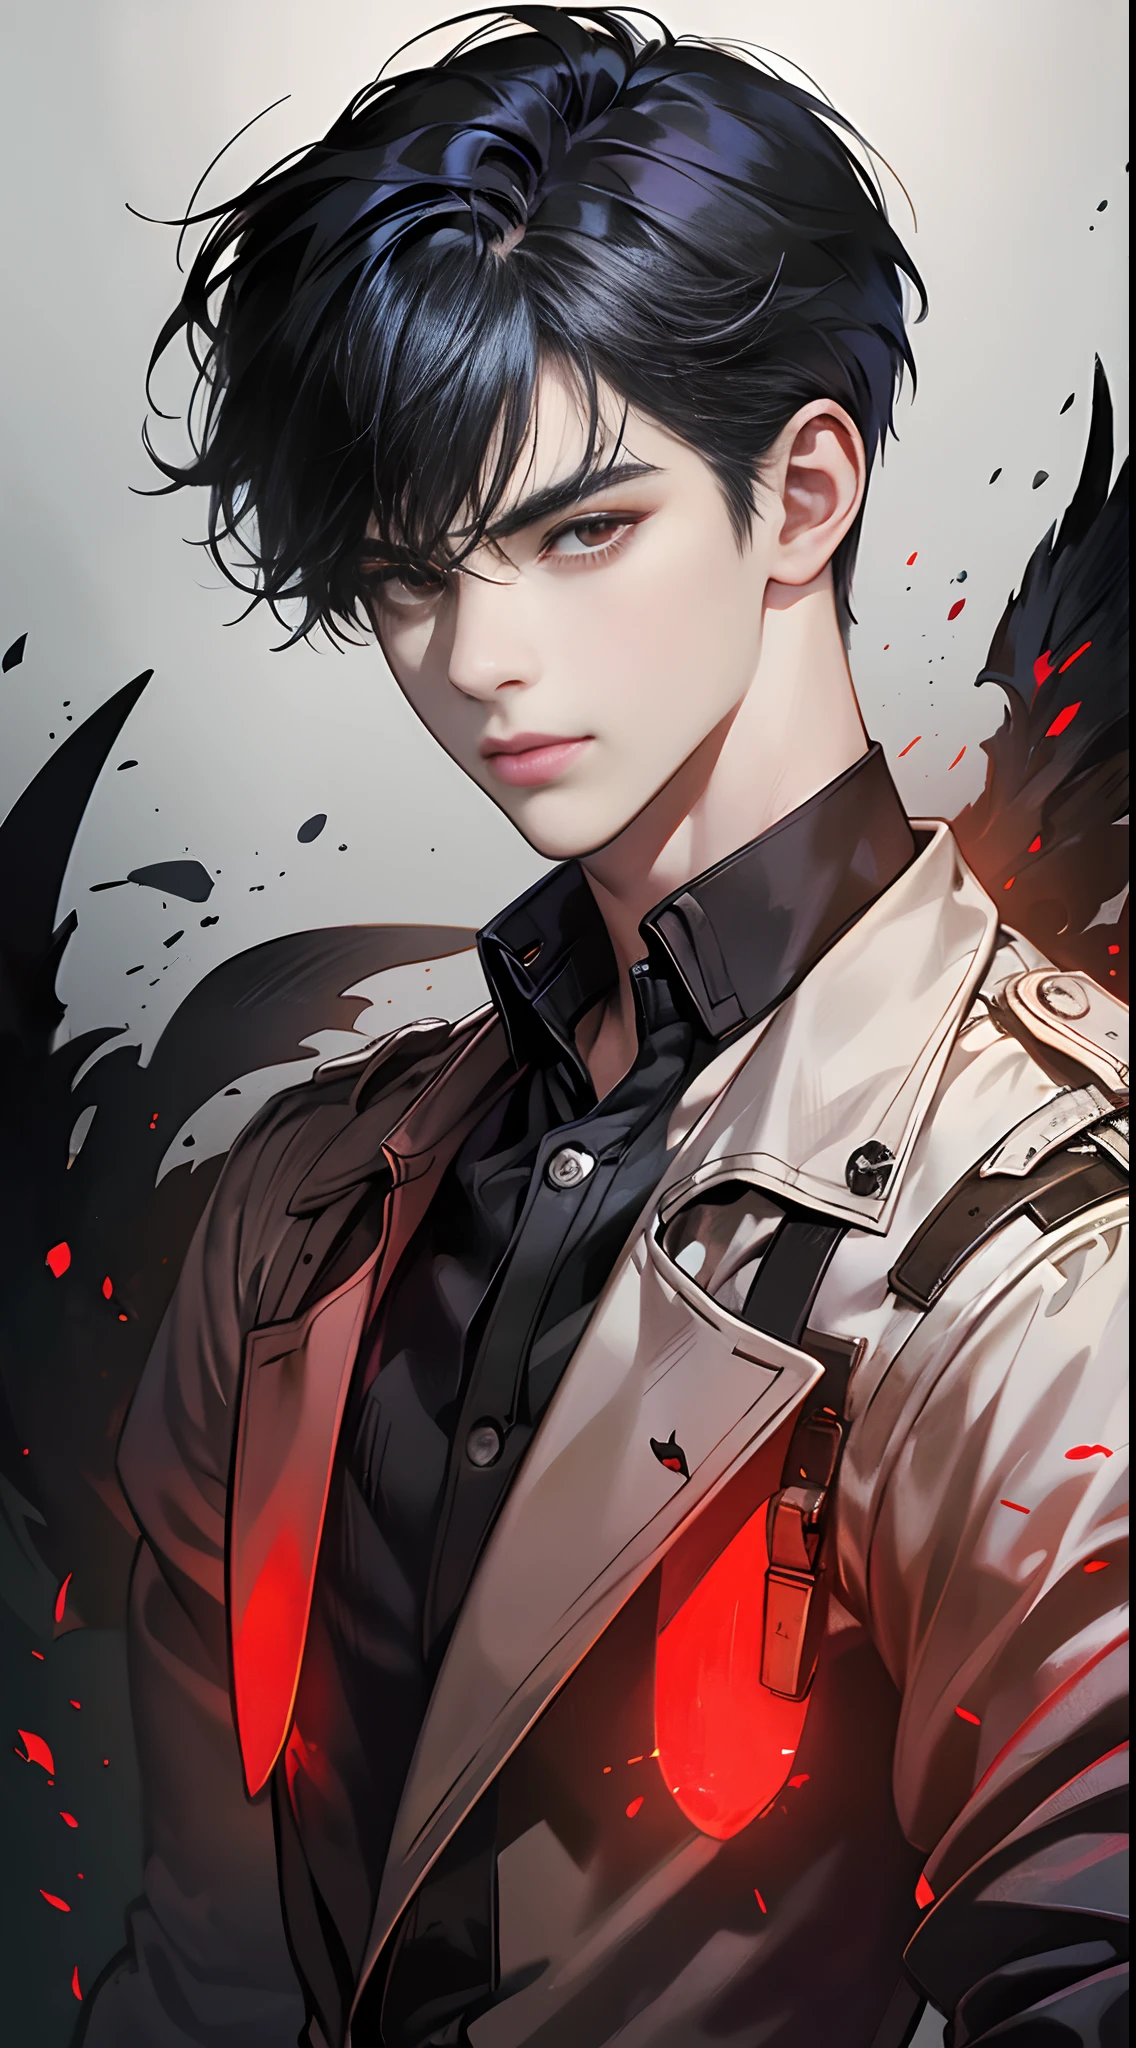 (Best Quality,4K,High resolution),male people，twinks，Man with a feminine face，Young Face，Blue mesh hair on black hair，disheveled boyish hair，Clear eyes，Red Eyeilitary jacket，Cargo pants，Combat boots，Realistic illustrations delicately expressed in detail，animesque，comic strip，Multiple flying crows，facing the front there，Red glowing eyes，Facial expression enhancement，Delicate illustrations expressed in detail，cross belt，Realistic portrayal，Vibrant colors，Ruins，Classic dark background